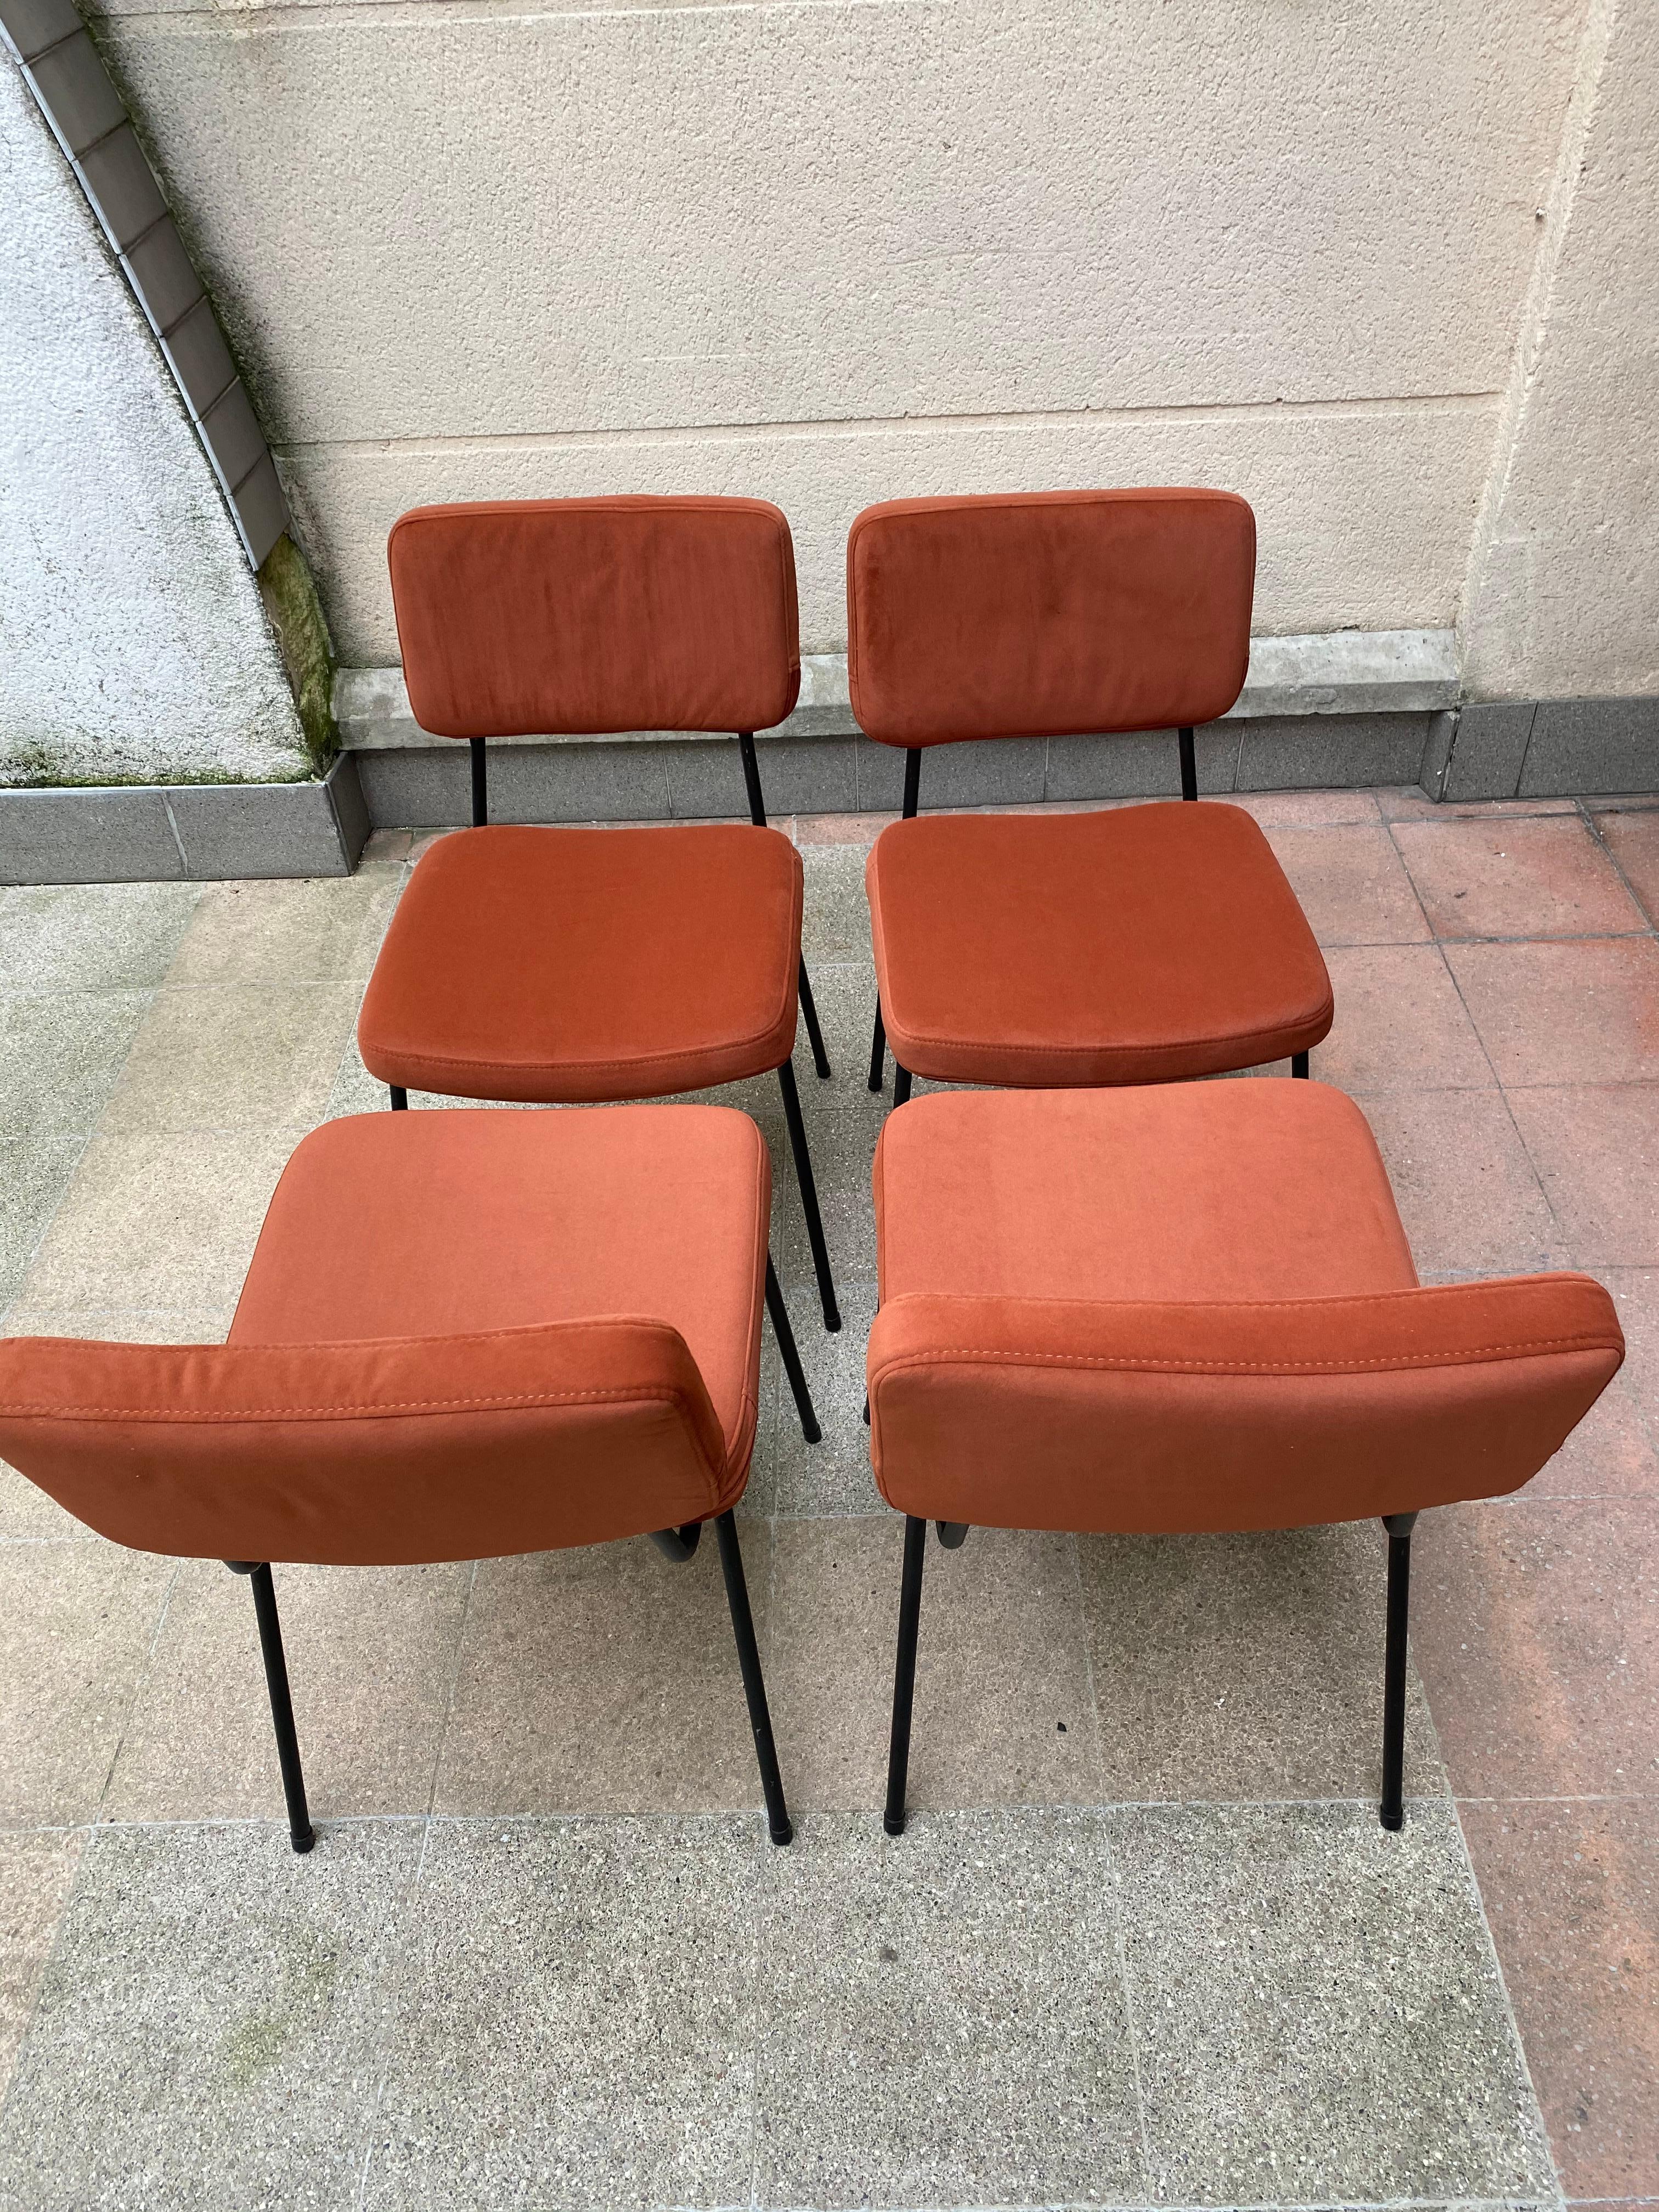 André Simard
Set of 4 chairs 
Brown/cognac fabrics and black lacquered metal
Airborne Edition
circa 1960
Measures: H 76 x W 43 x D 43
From the collection pierre bergé
Restored to new 
1100 Euros the 4.